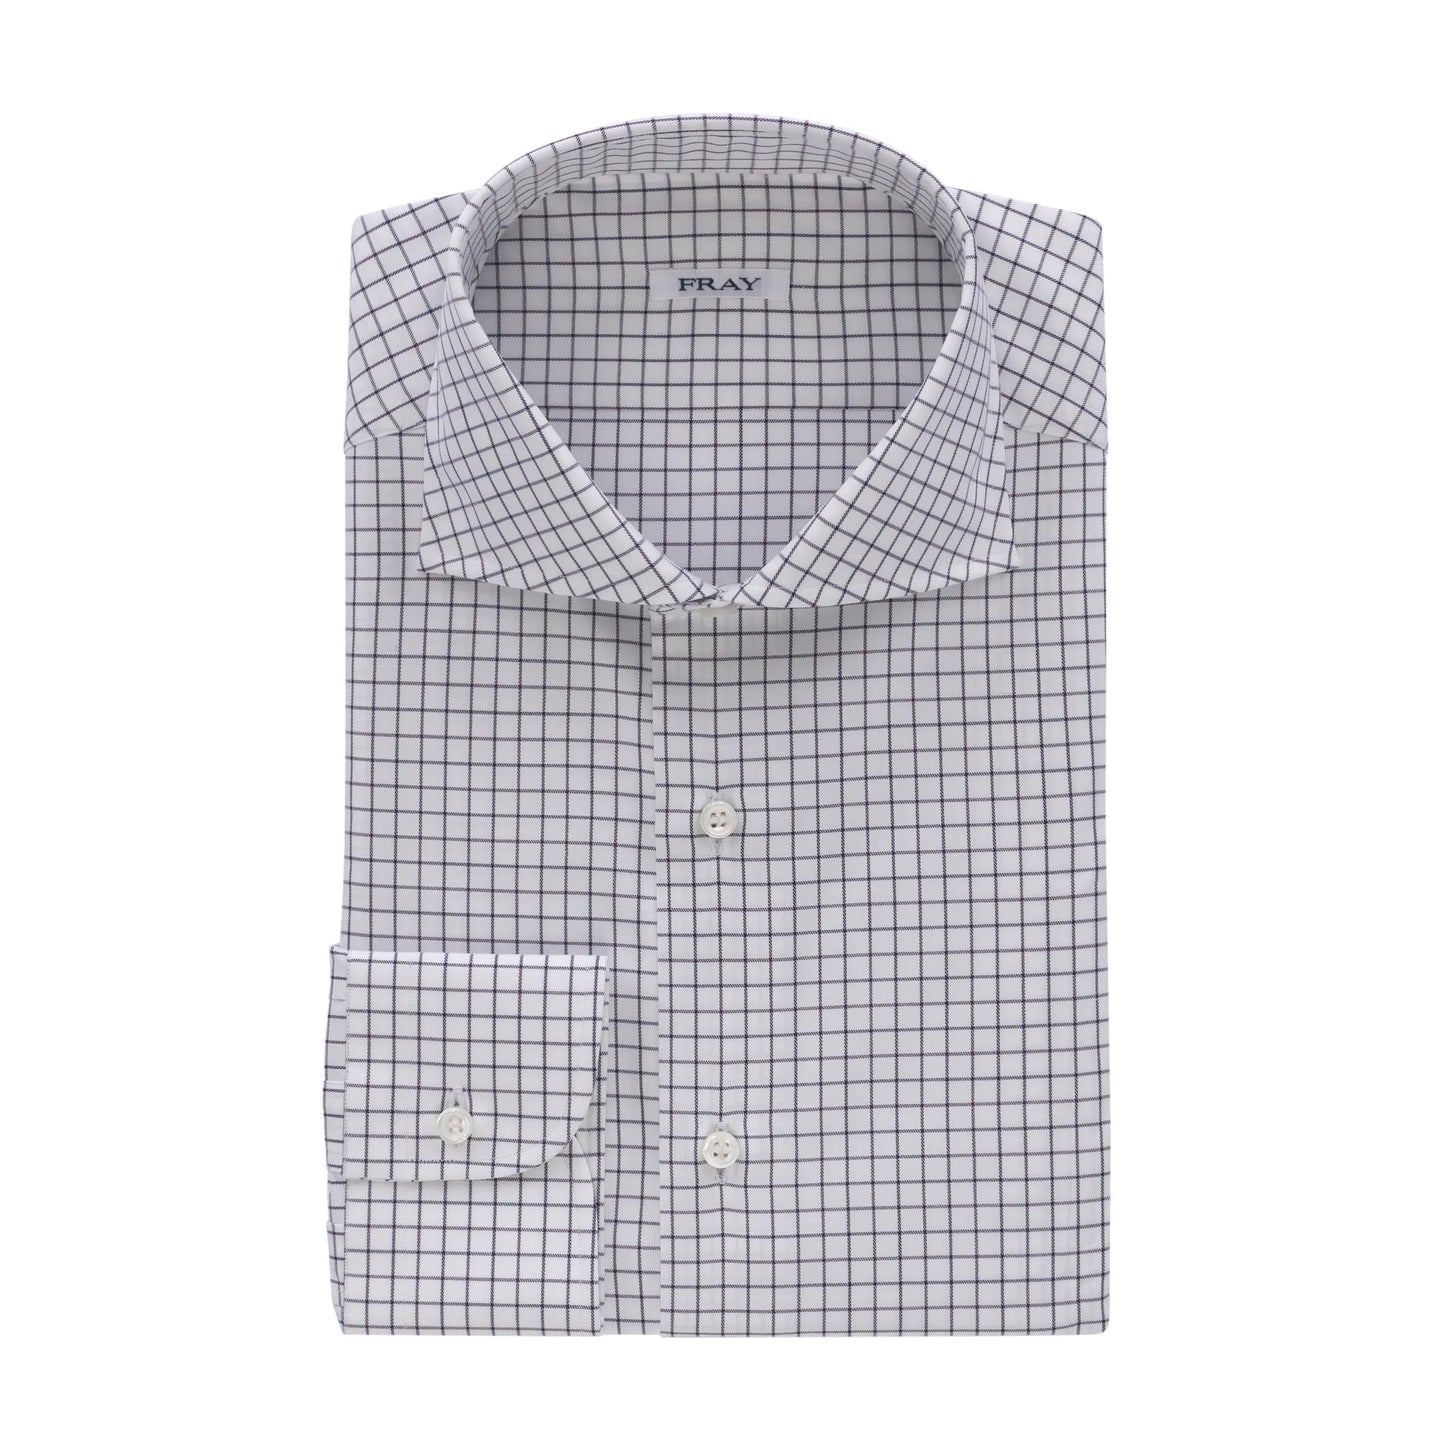 Fray Cotton Shirt in White, Red and Blue - SARTALE